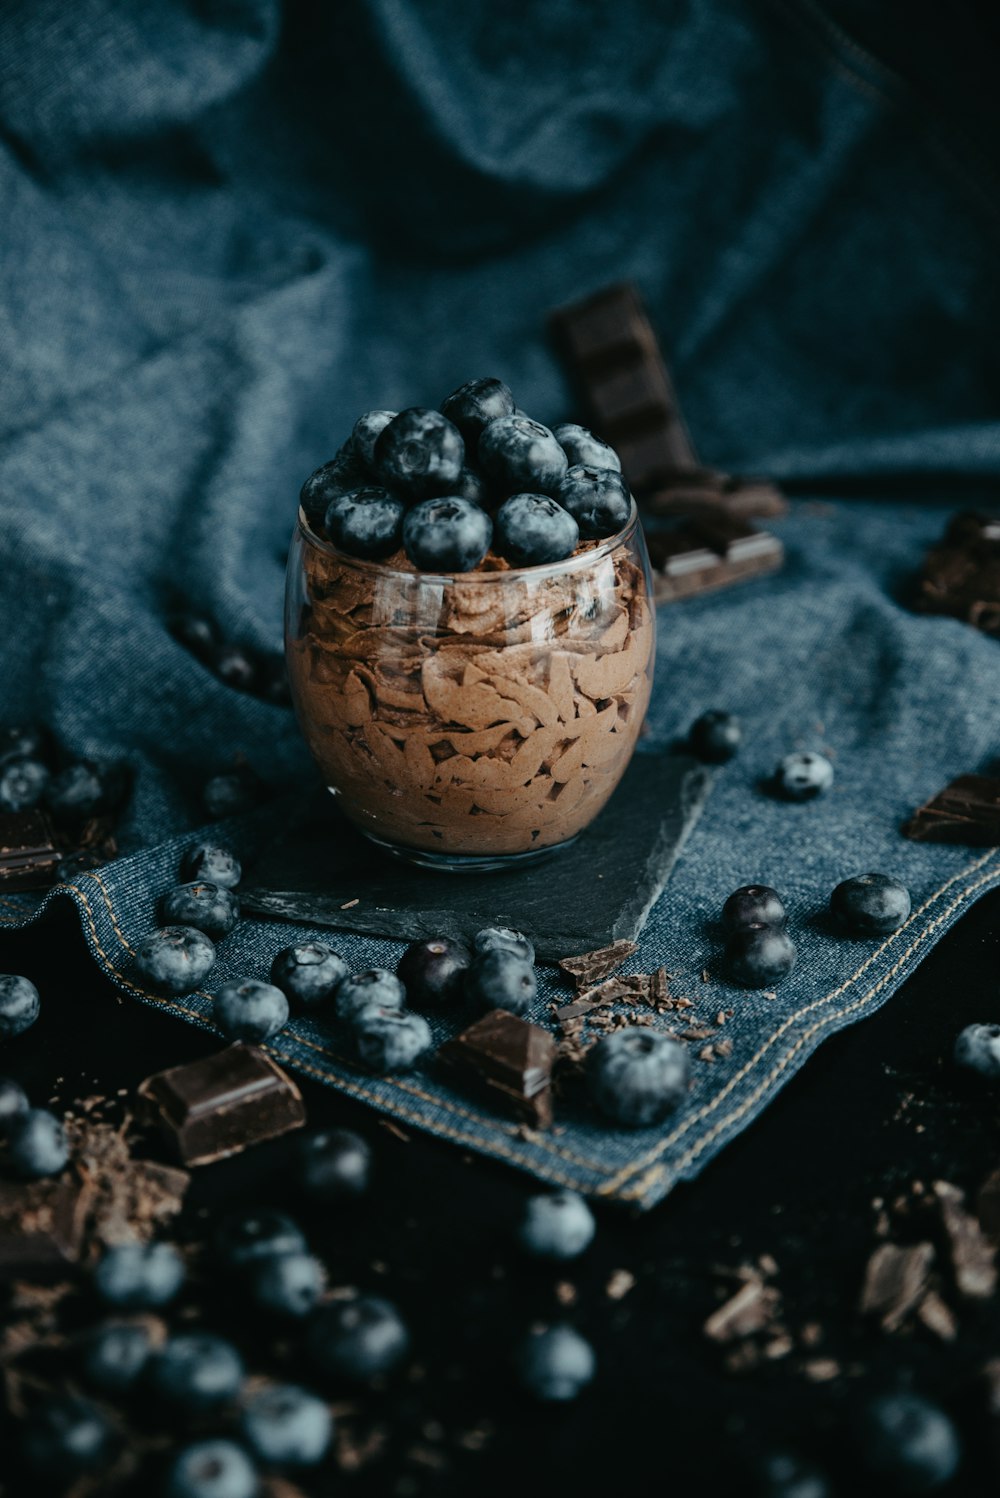 a glass bowl filled with blueberries and chocolate